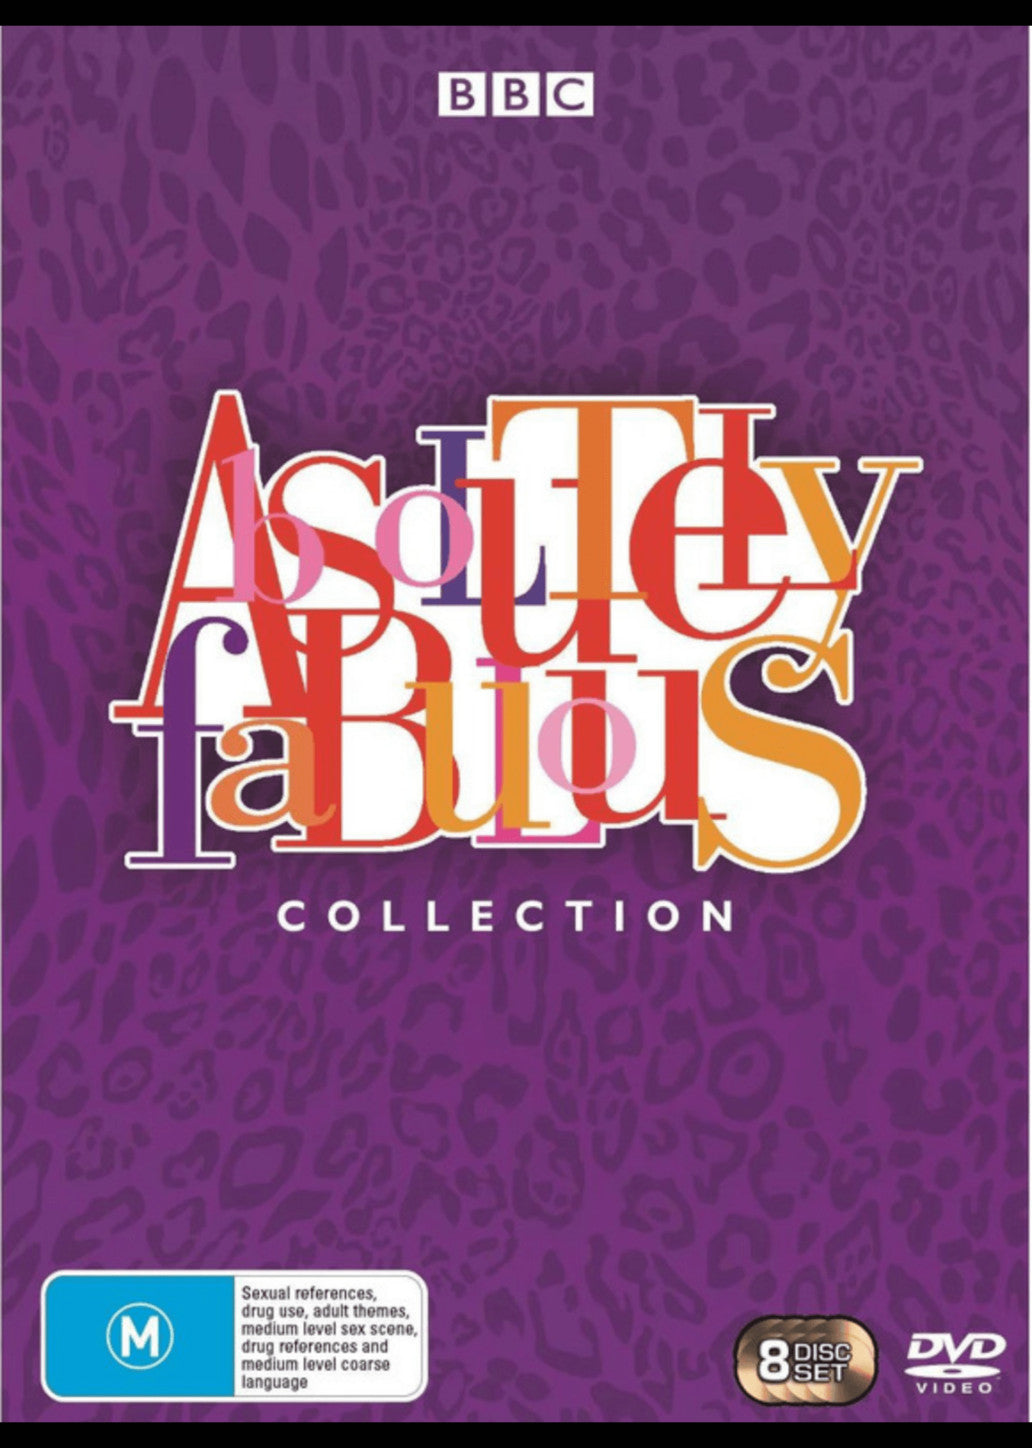 ABSOLUTELY FABULOUS COLLECTION